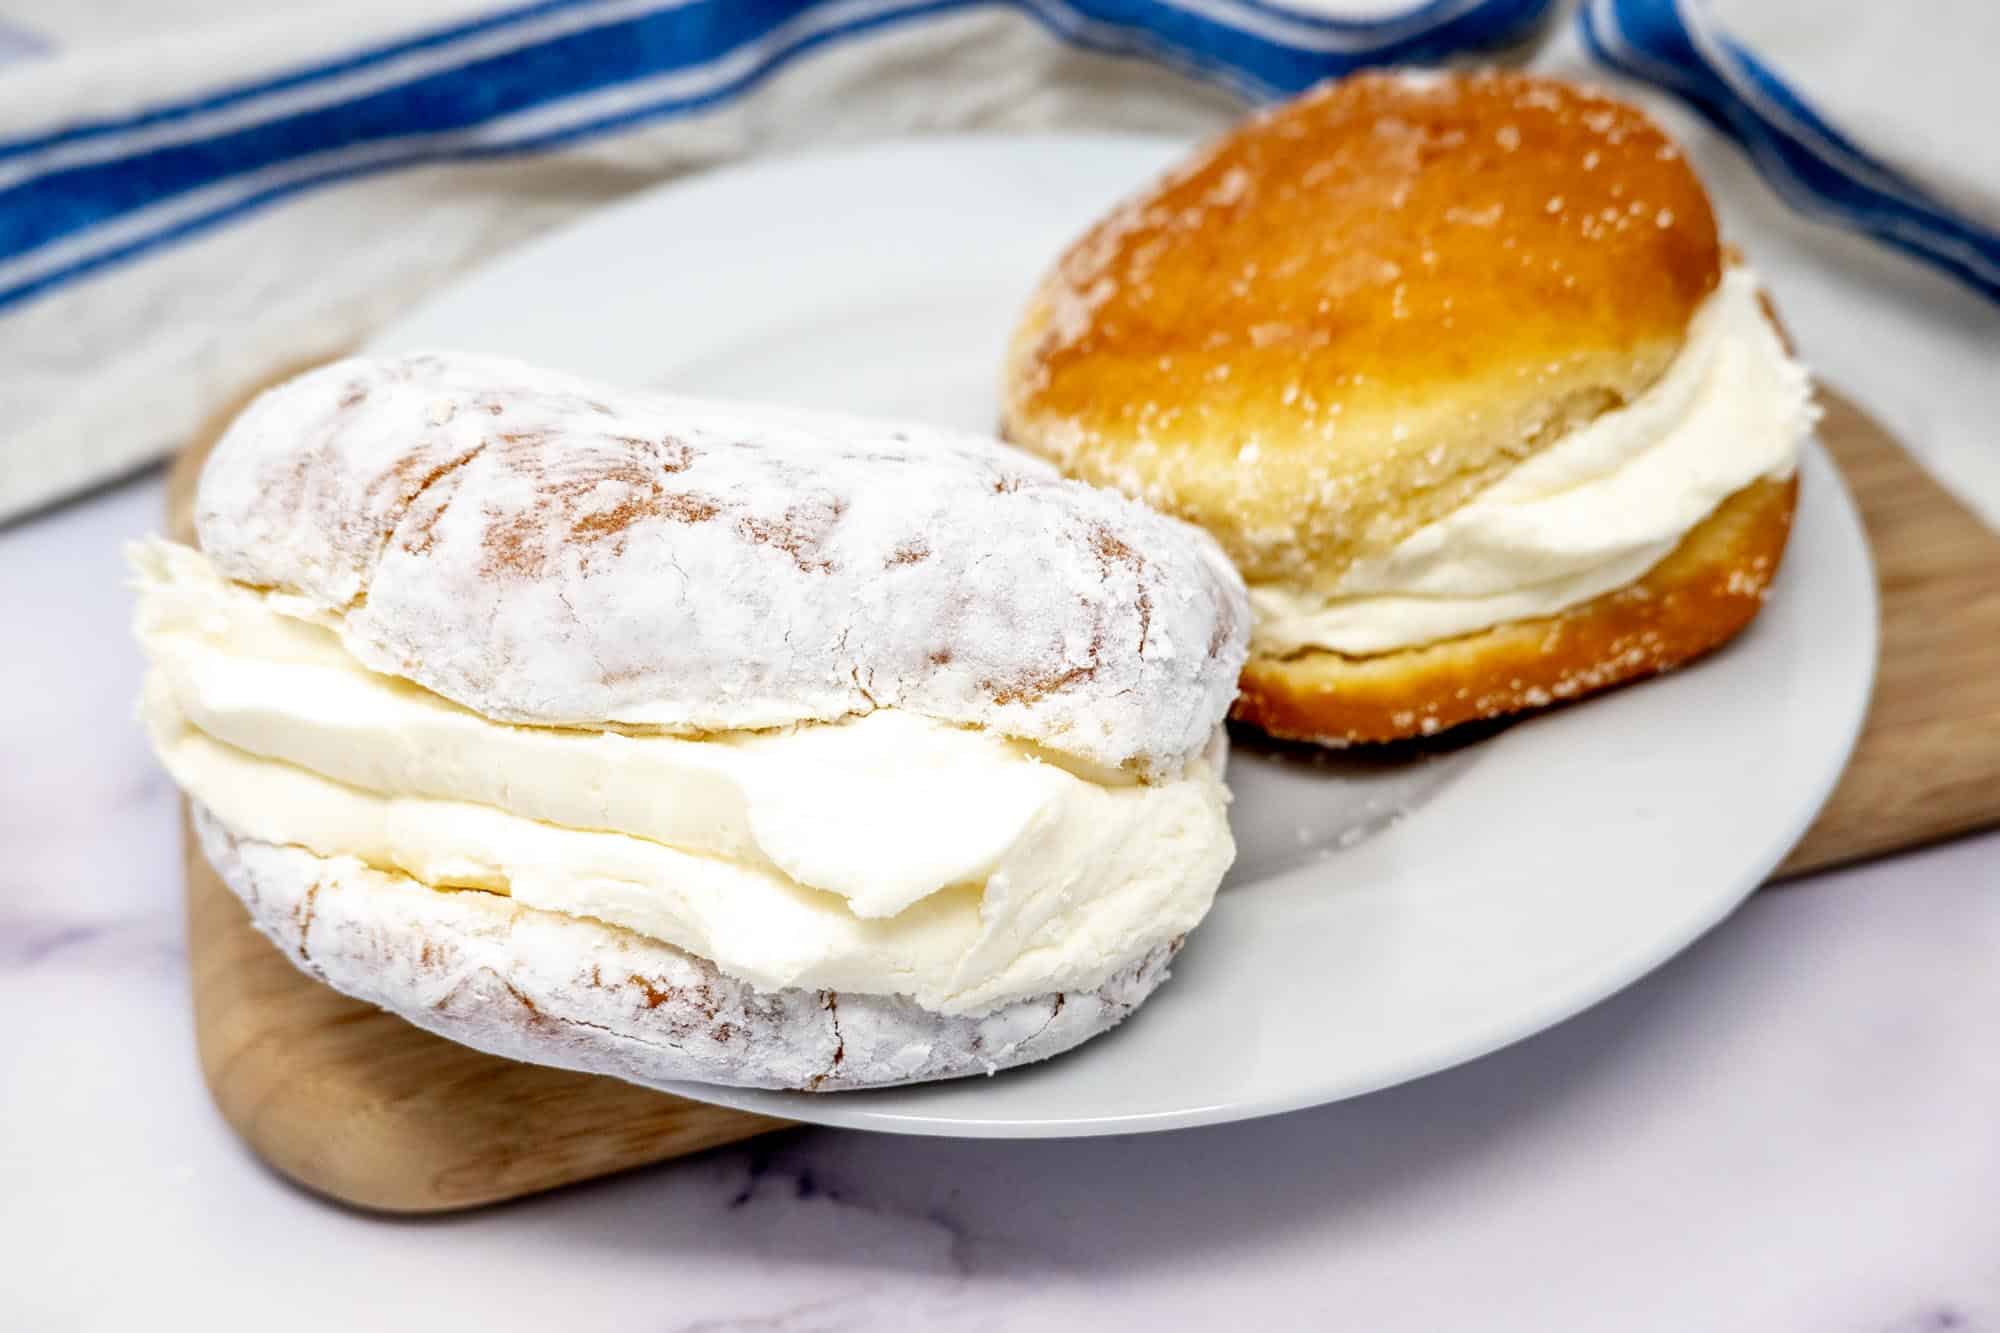 Two cream-filled donuts on a plate--one topped with powdered sugar and the other with granulated sugar